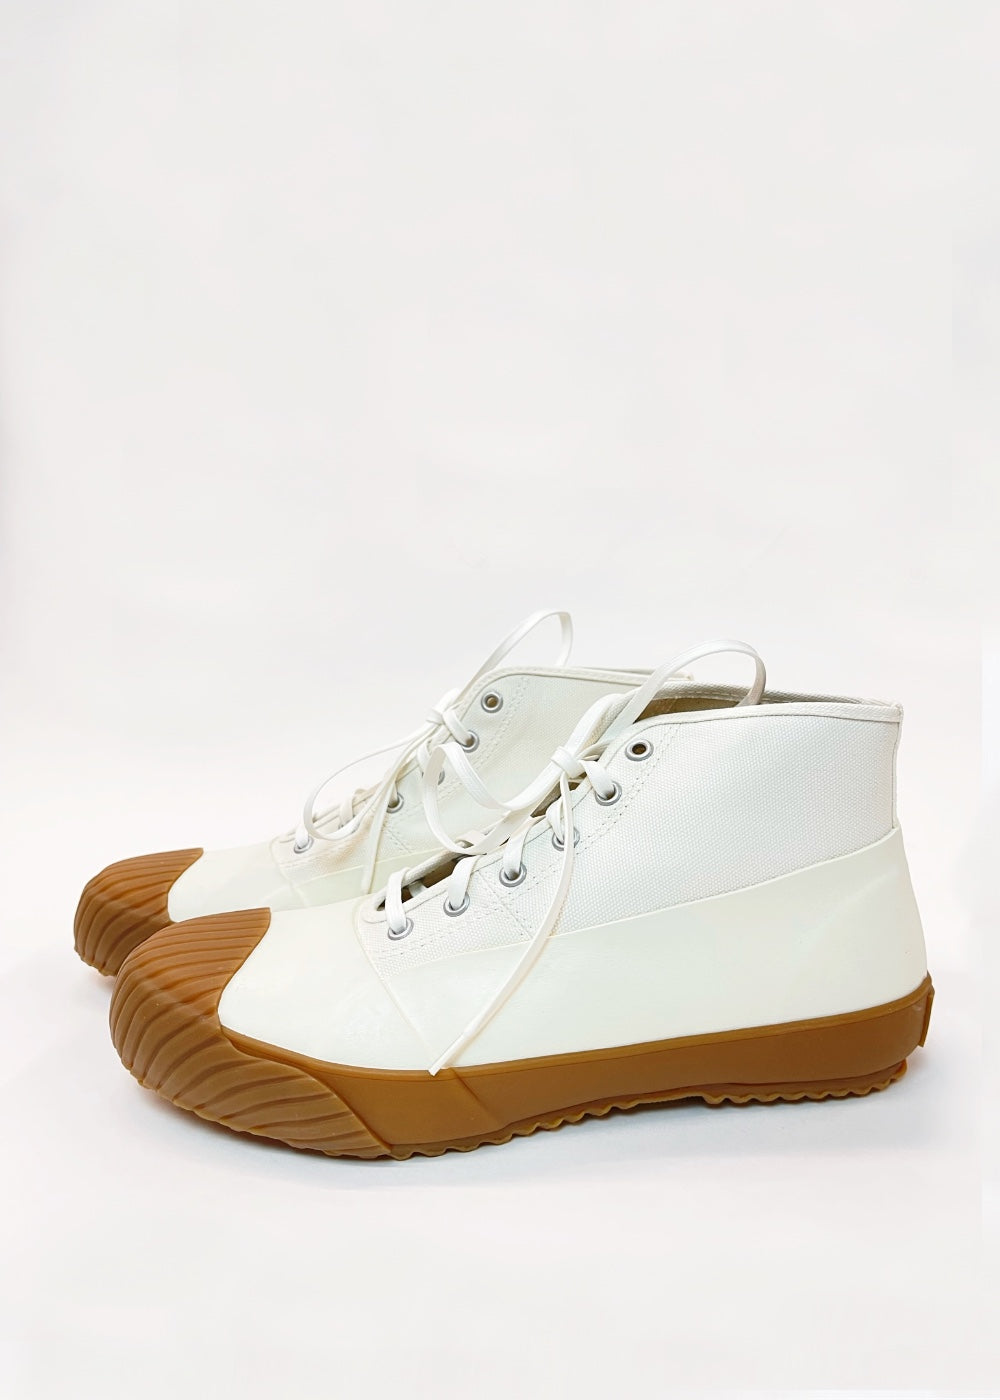 Moonstar Alweather Shoes White